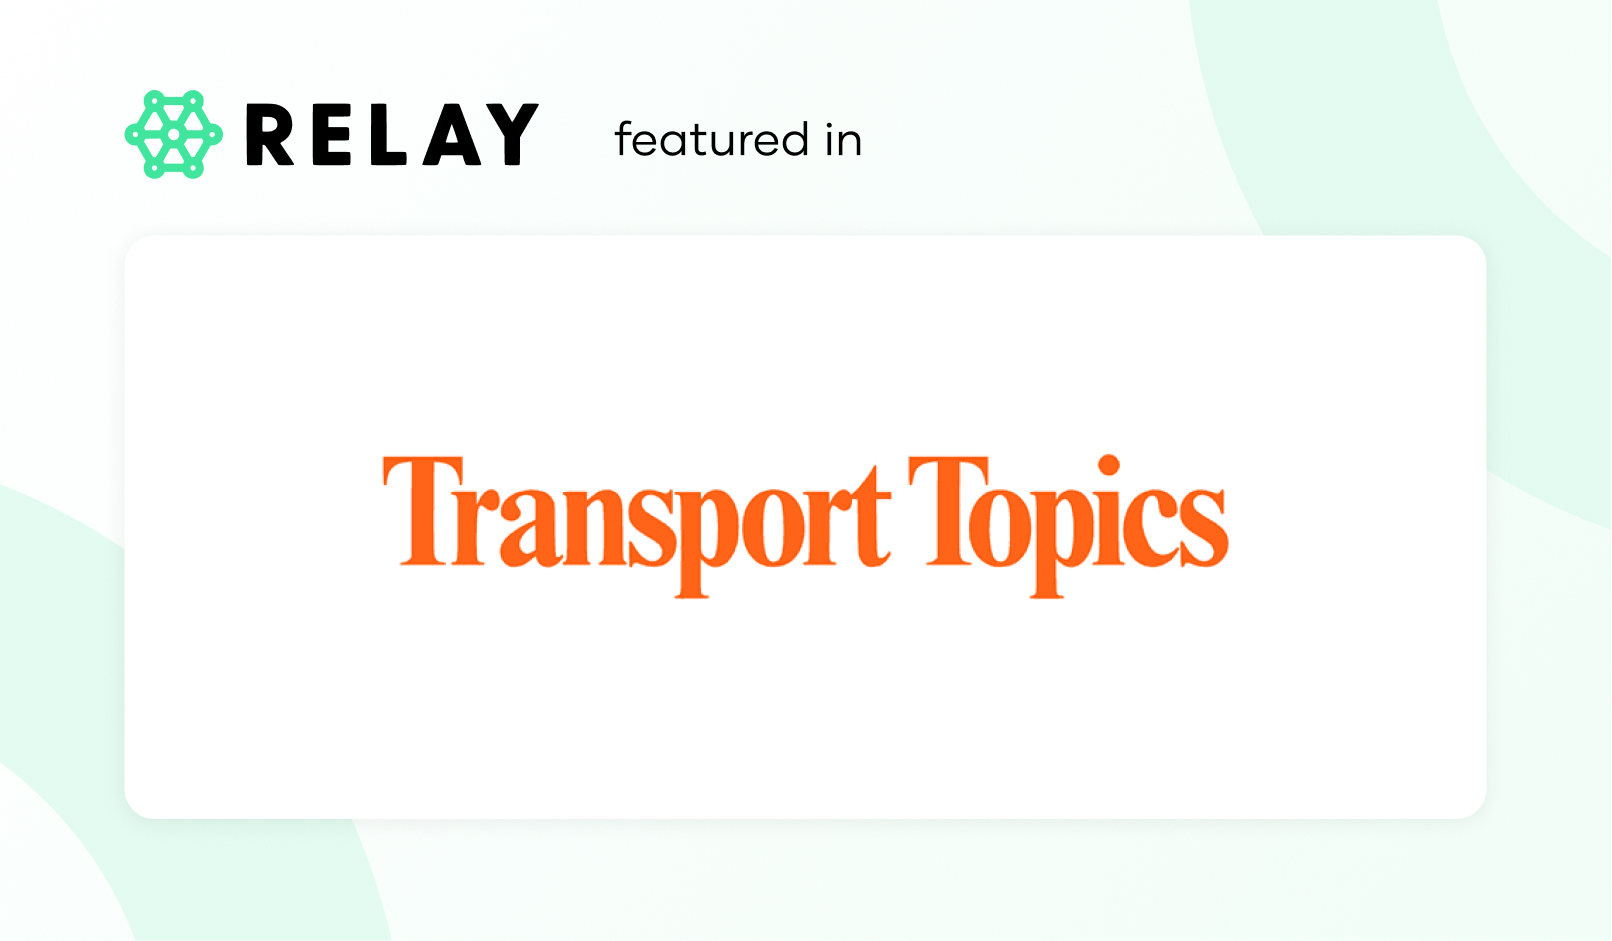 Transport Topics discusses the fuel payments partnership between Relay and Pilot 